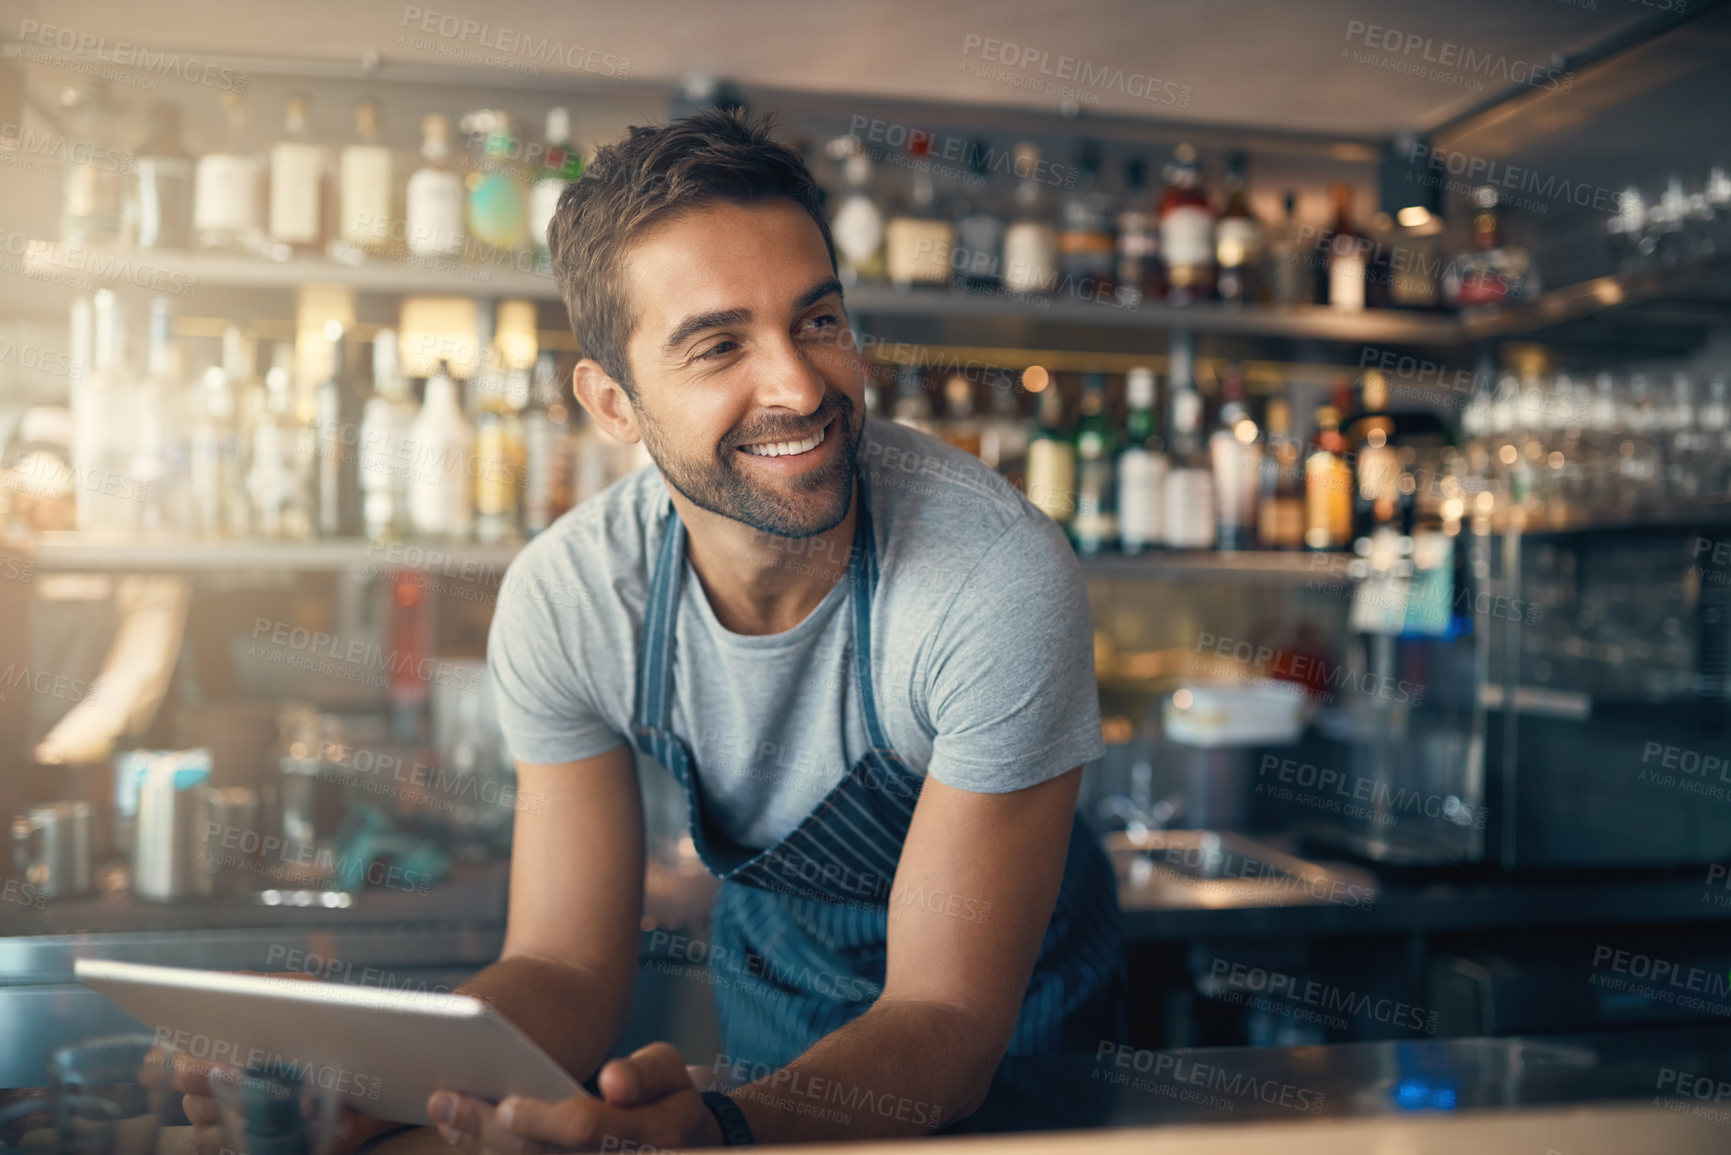 Buy stock photo Shot of a young man using a digital tablet while working behind a bar counter